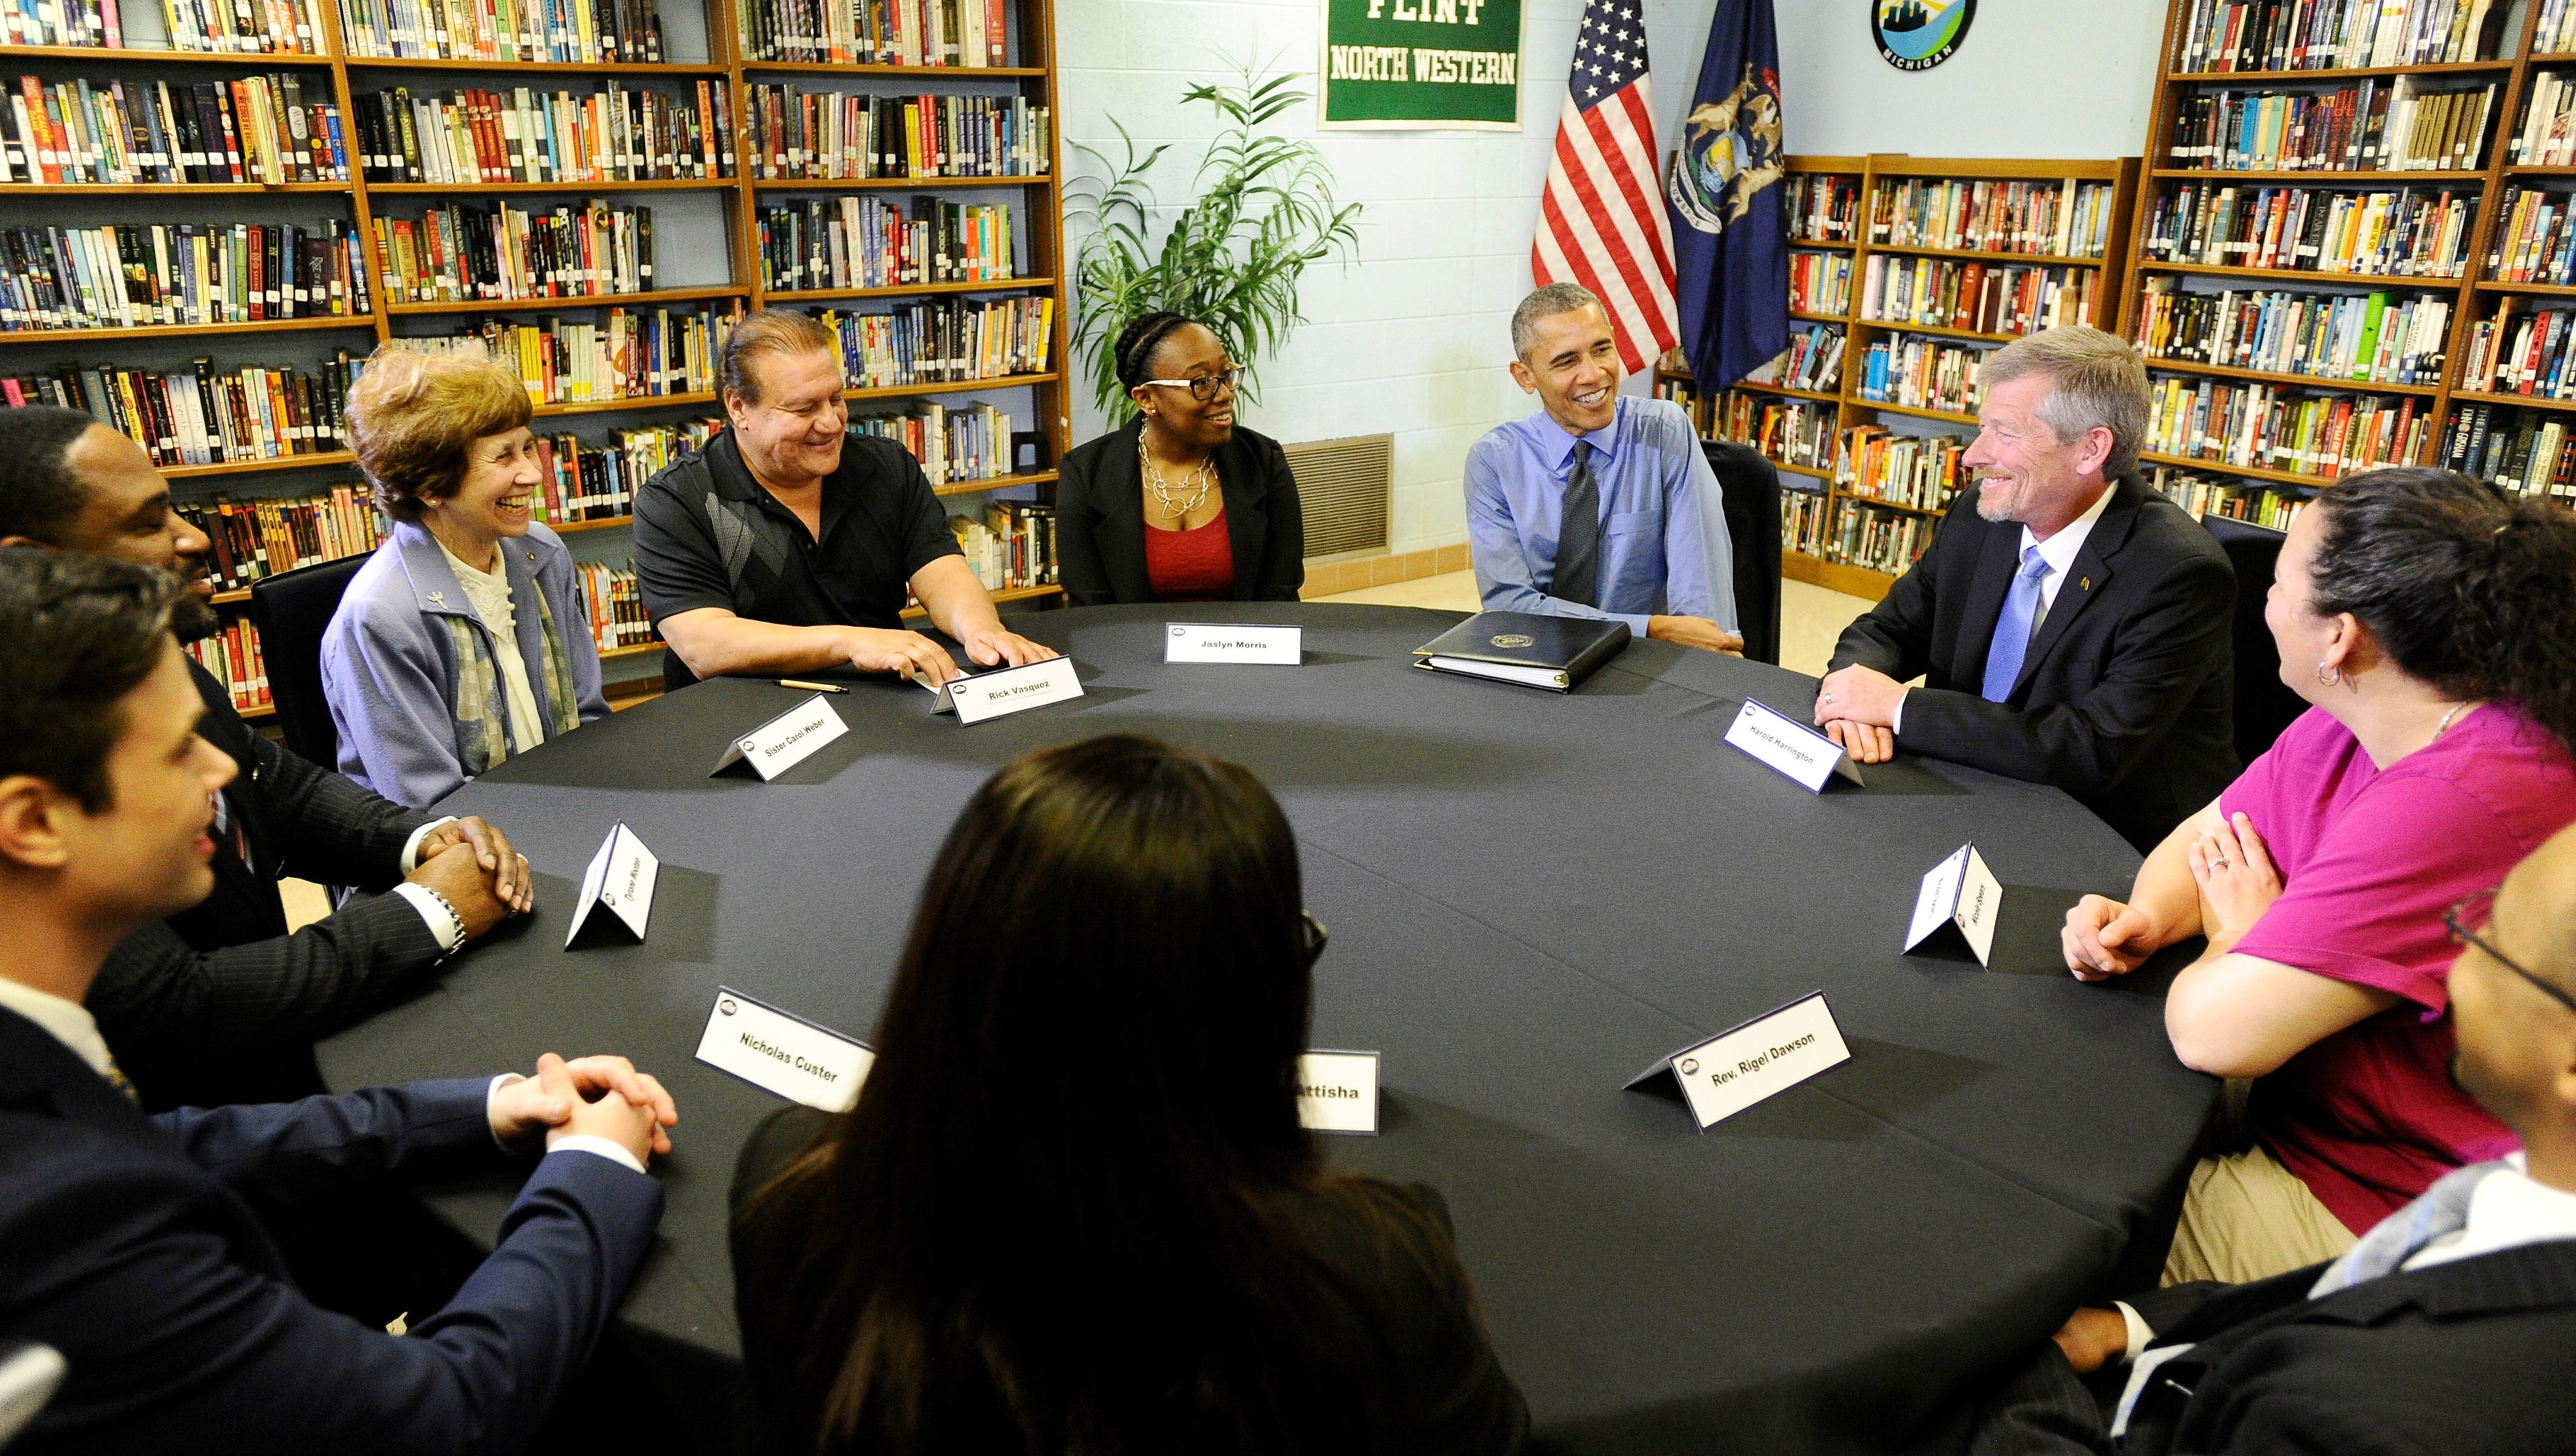 Prior to his remarks at Northwestern High School President Obama participates in a round table discussion with Flint residents in the library in Flint, Michigan, on May 4, 2016.